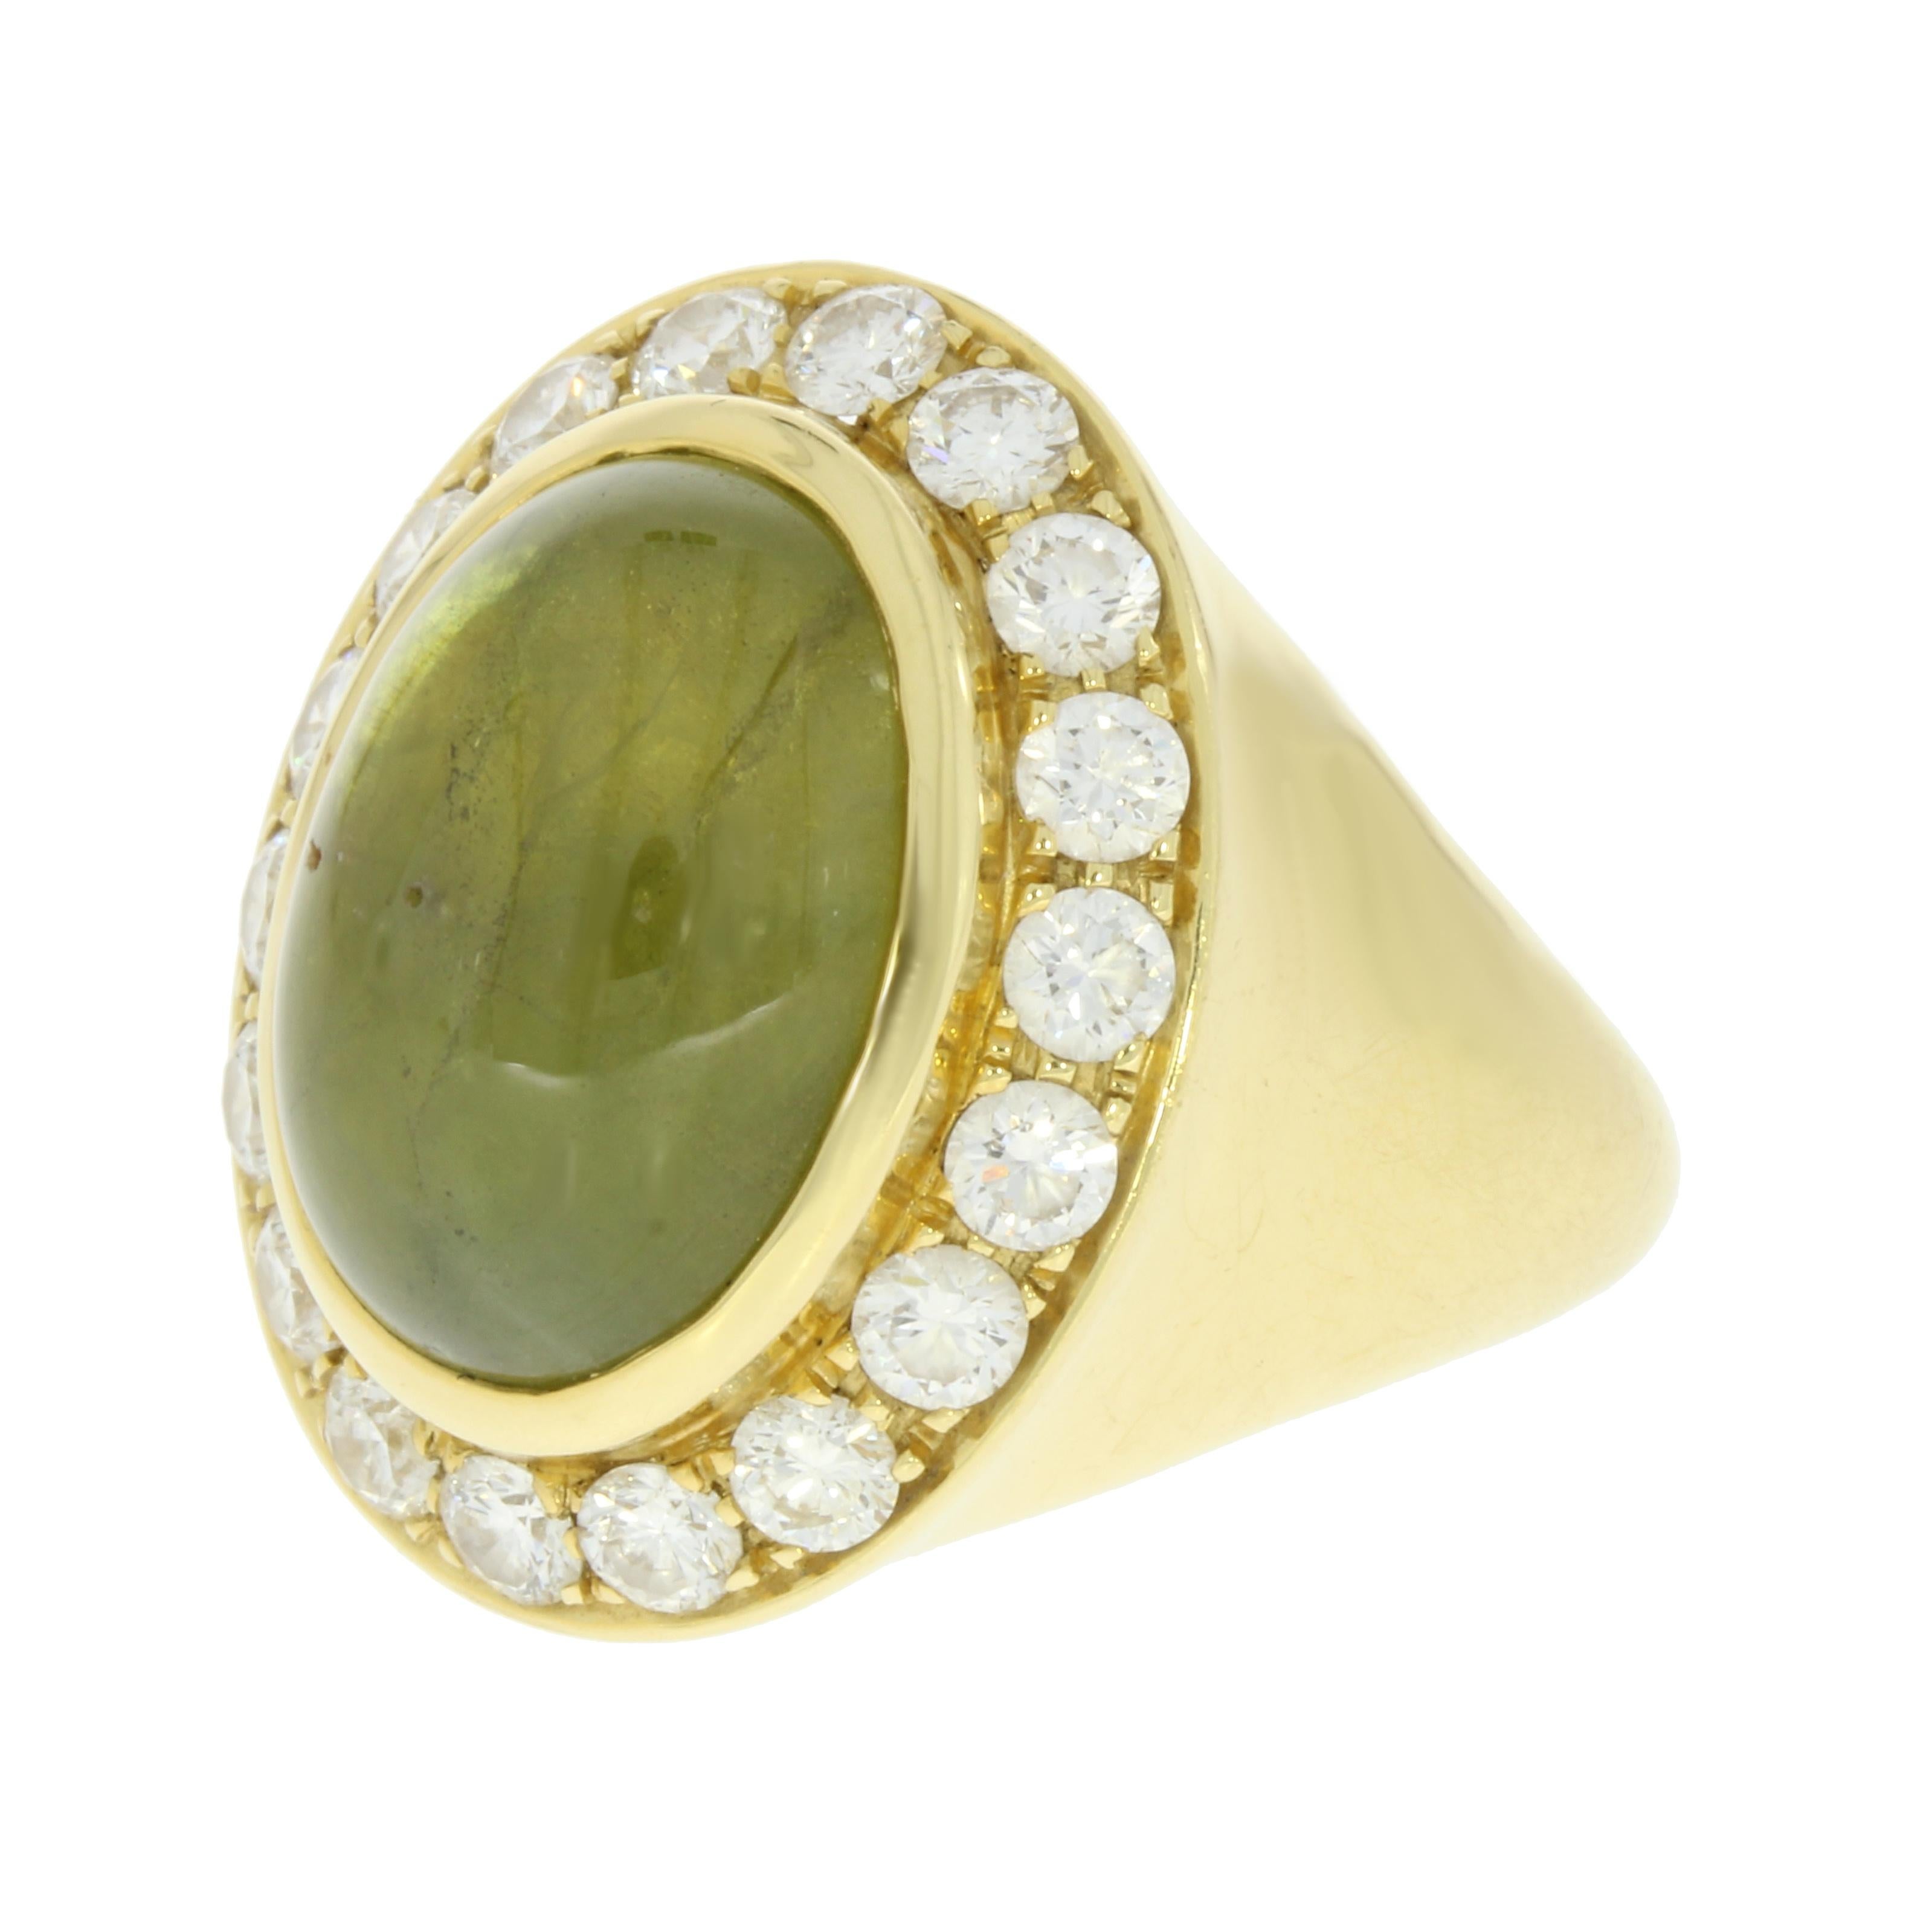 Contemporary 18 Karat Yellow Gold Green Sapphire and Diamond Pinky Ring by Niquesa